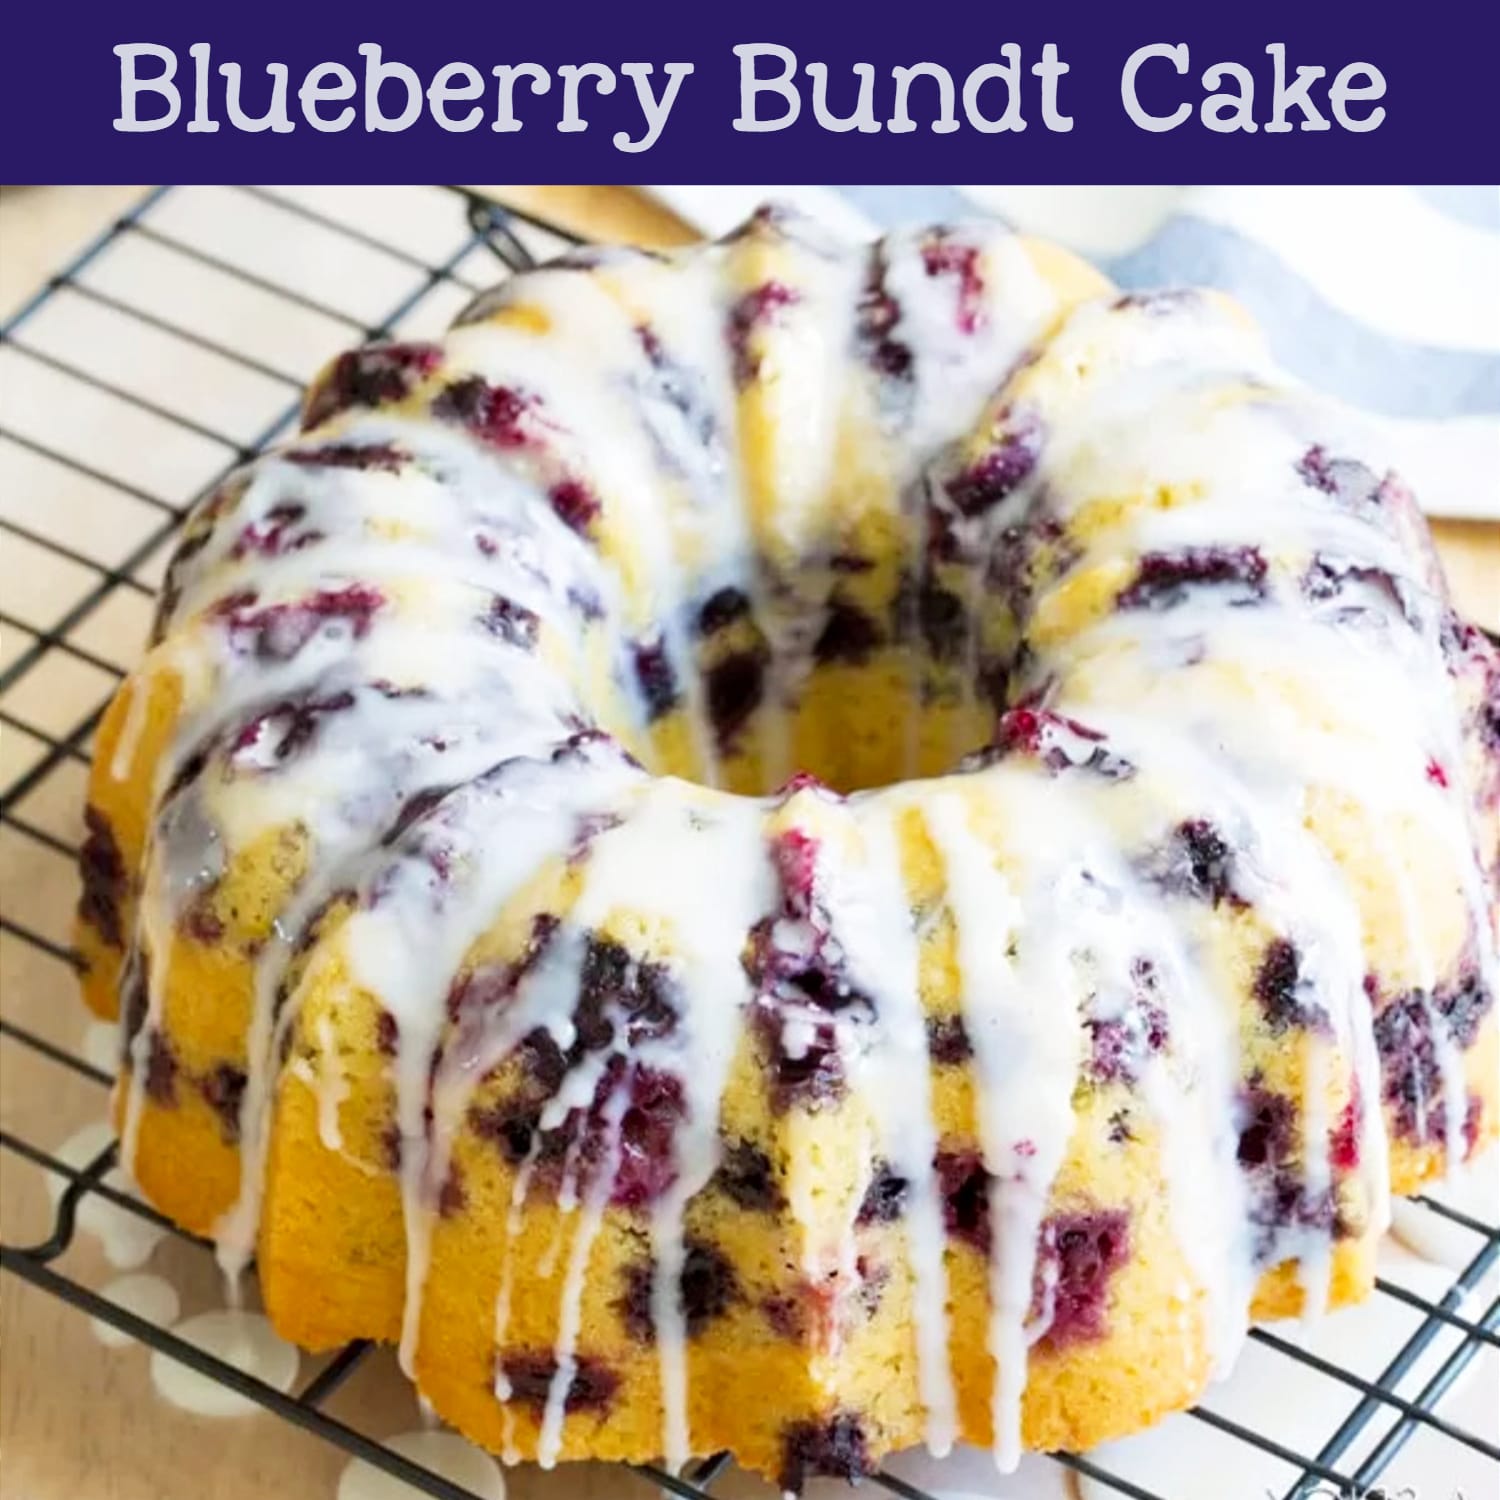 Make ahead breakfast ideas for a crowd, brunch food ideas and thoughtful funeral food ideas for a crowd - these breakfast cake and bundt cake recipes are perfect brunch food ideas and easy breakfast ideas for guests - yummy blueberry recipes